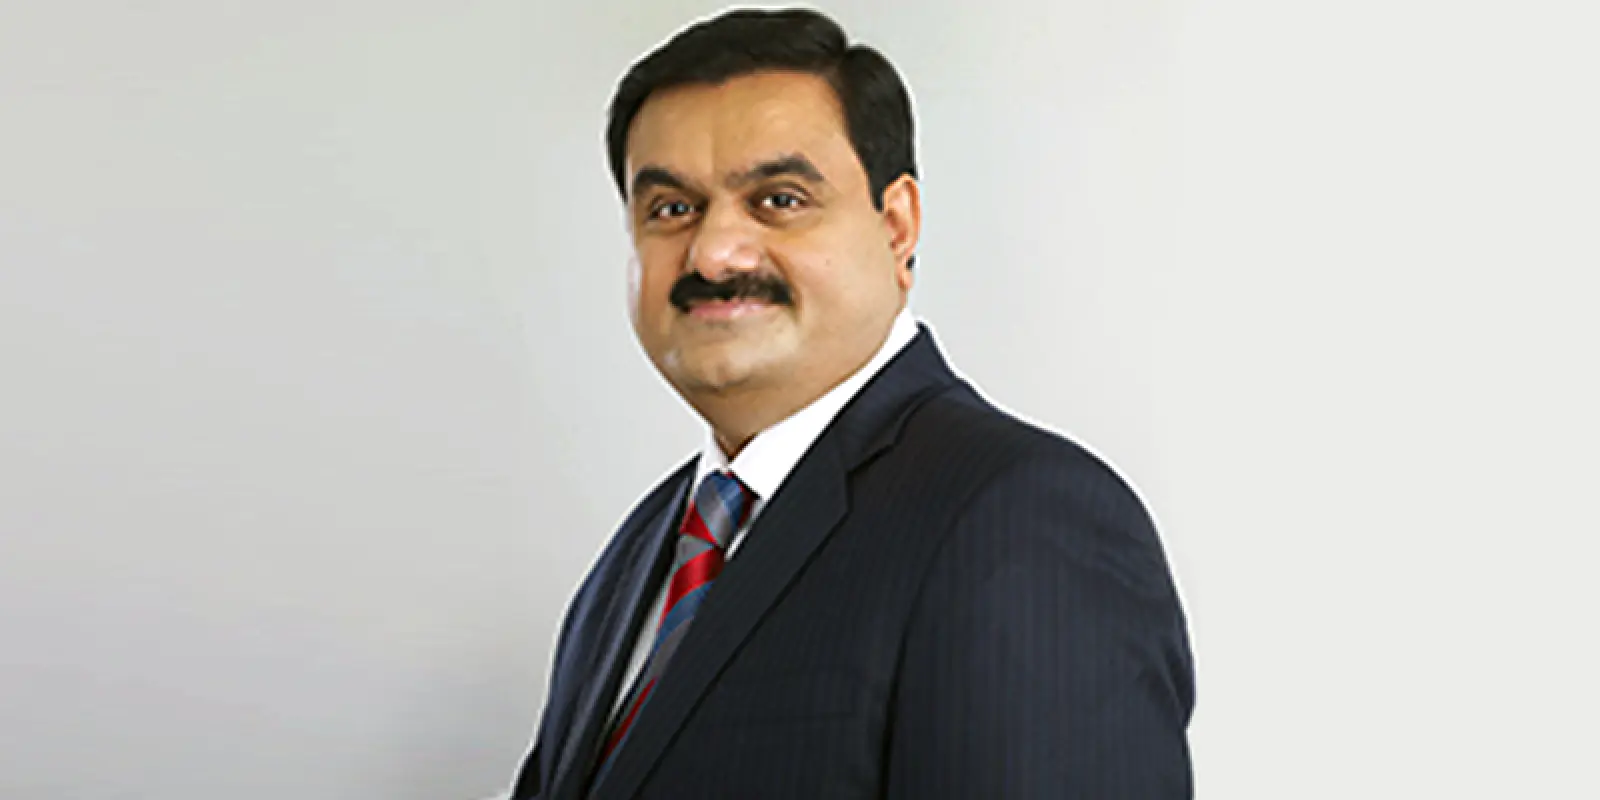 Adani again became Asia's richest industrialist by overtaking Mukesh Ambani, ranked 11th in the world